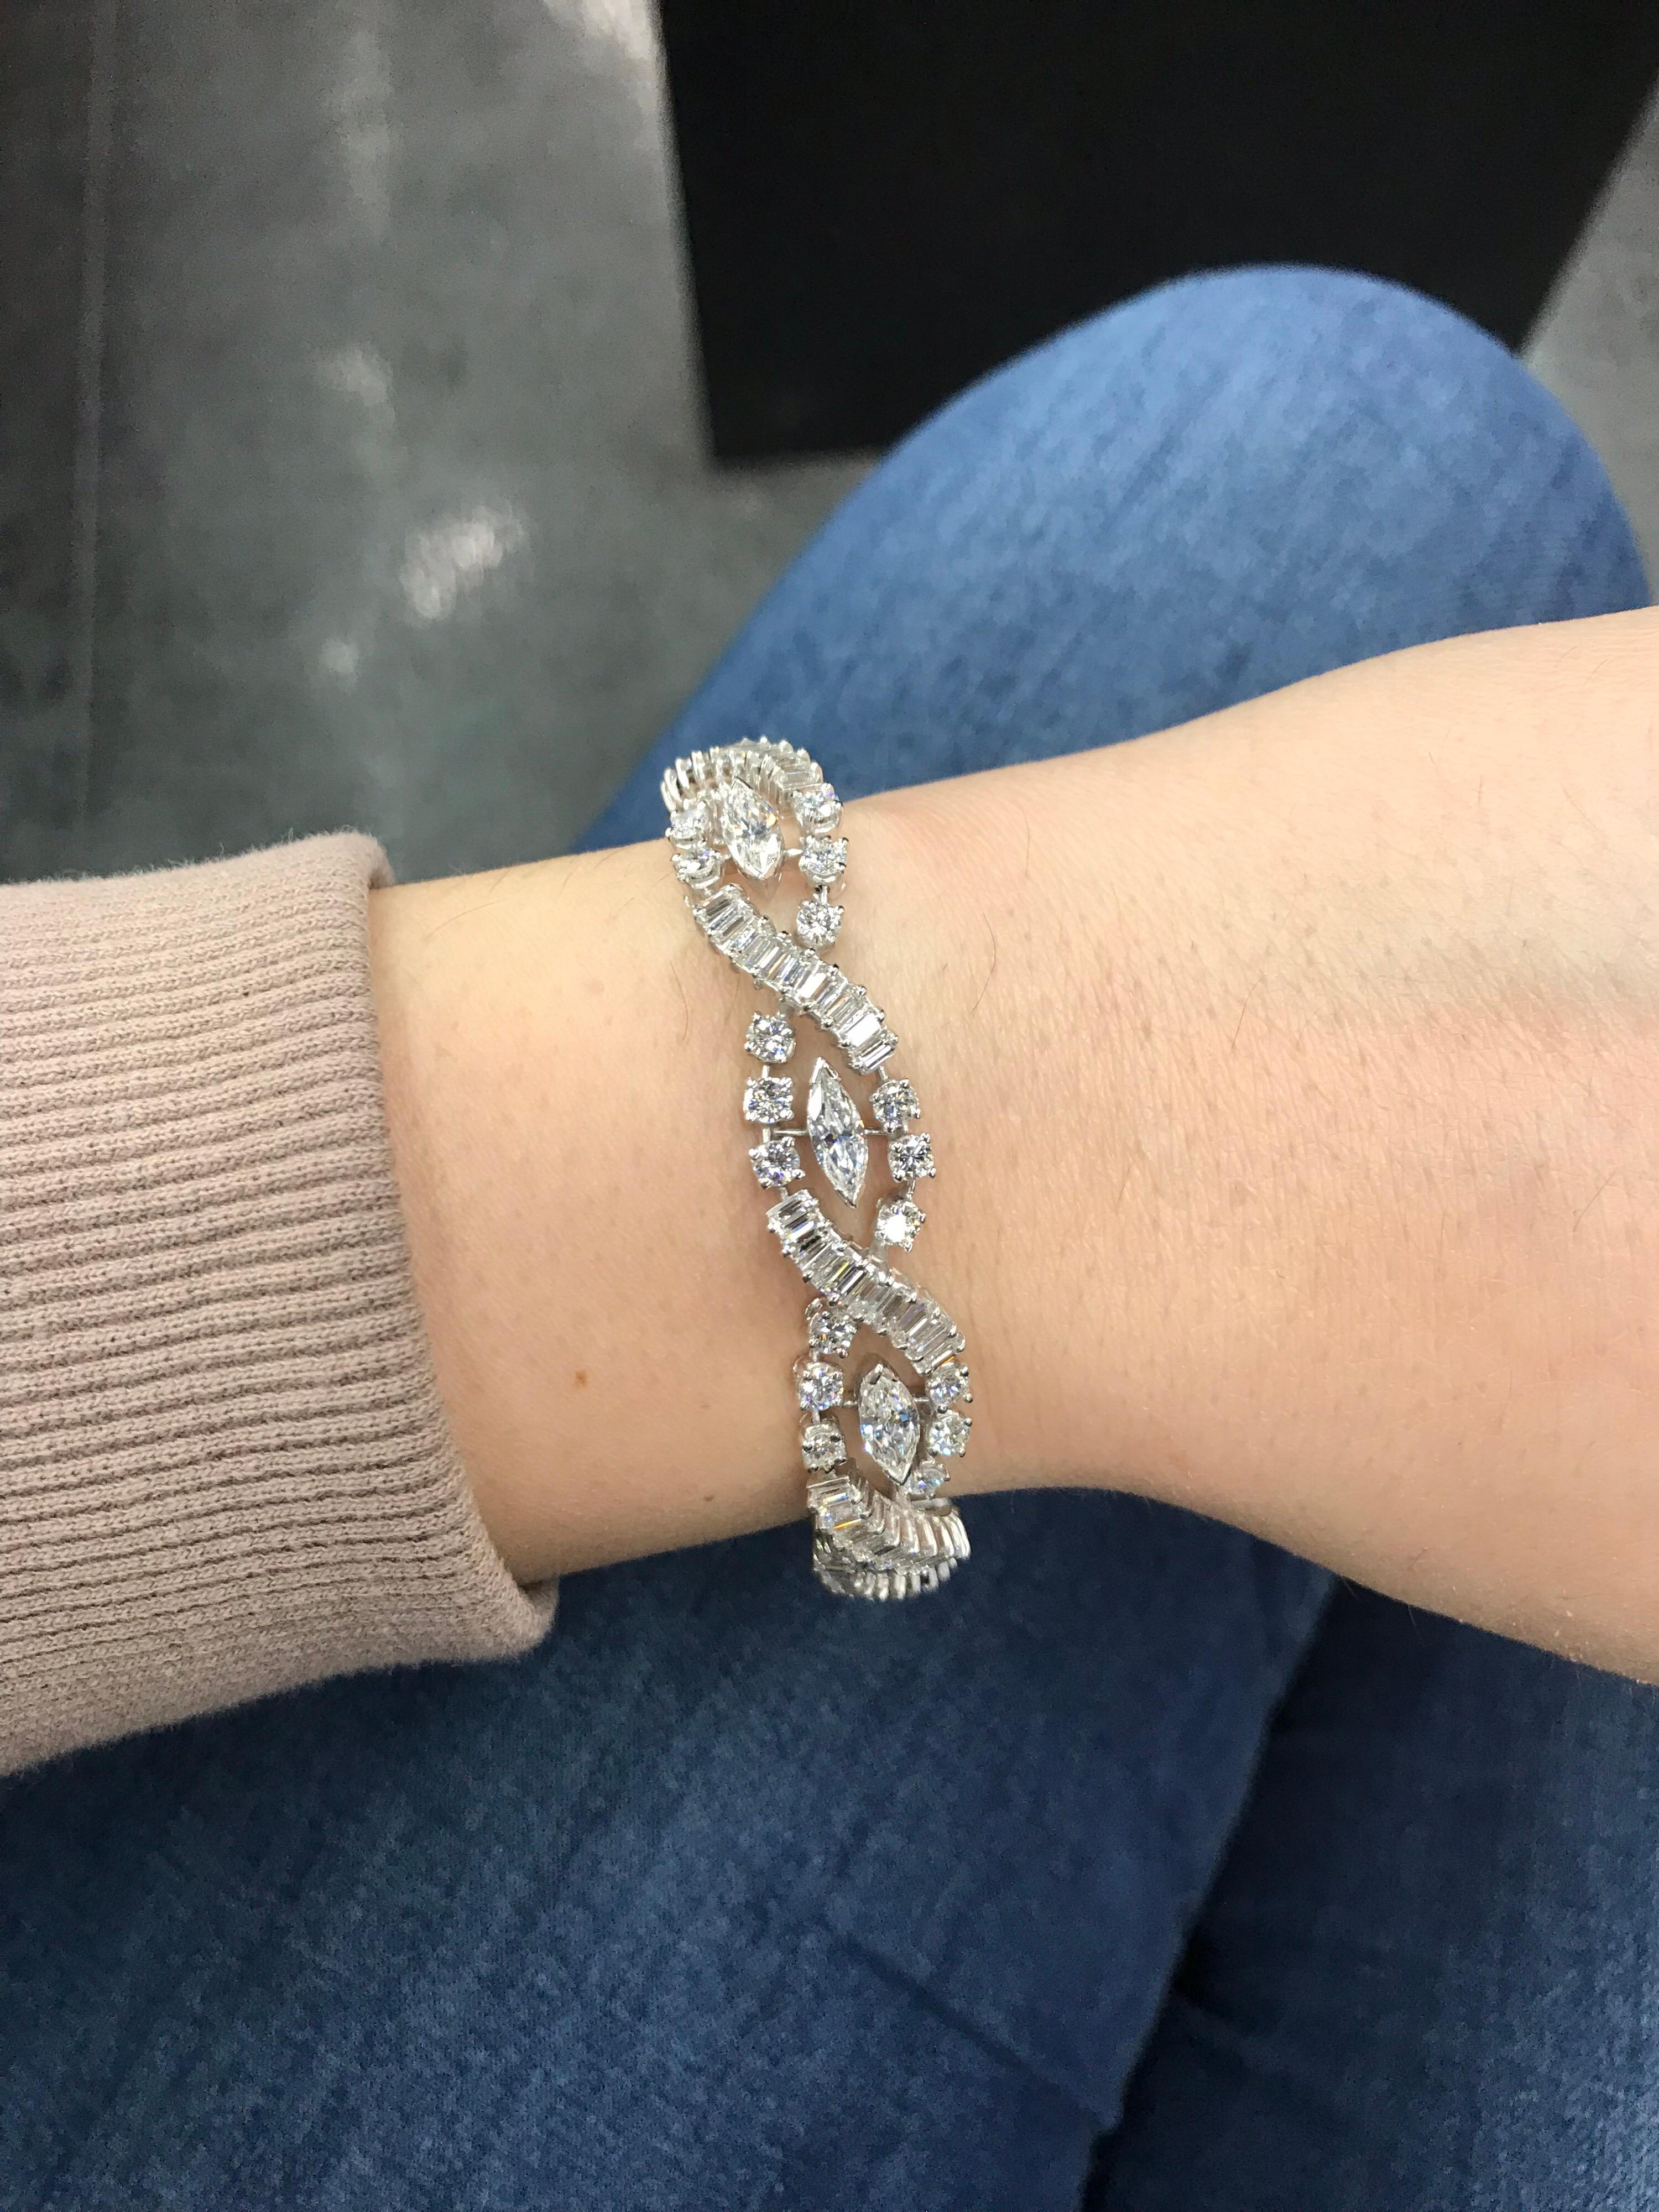 Platinum bracelet featuring 9 marquise cut diamonds and alternating baguette and round brilliants weighing a total of 10 carats. 
Color G-H
Clarity SI